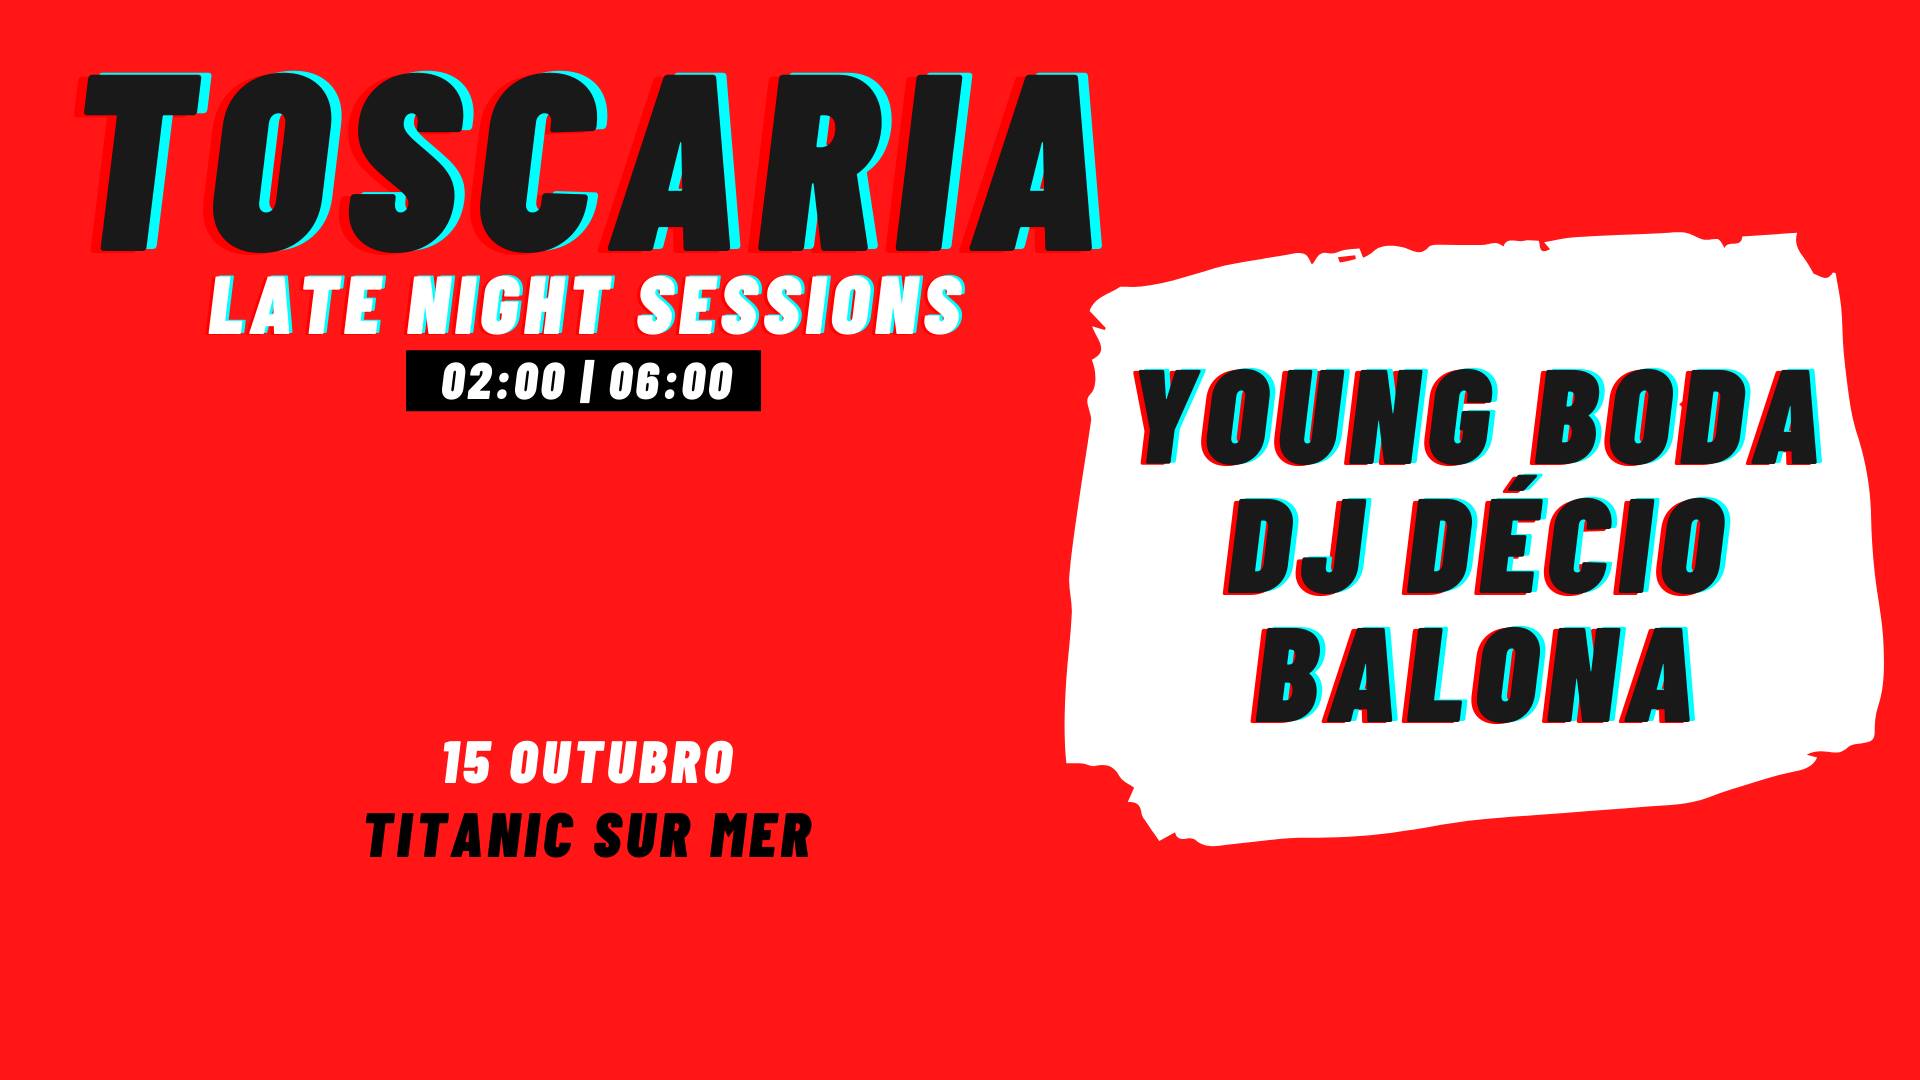 Toscaria - Late Night Sessions @ Titanic Sur Mer